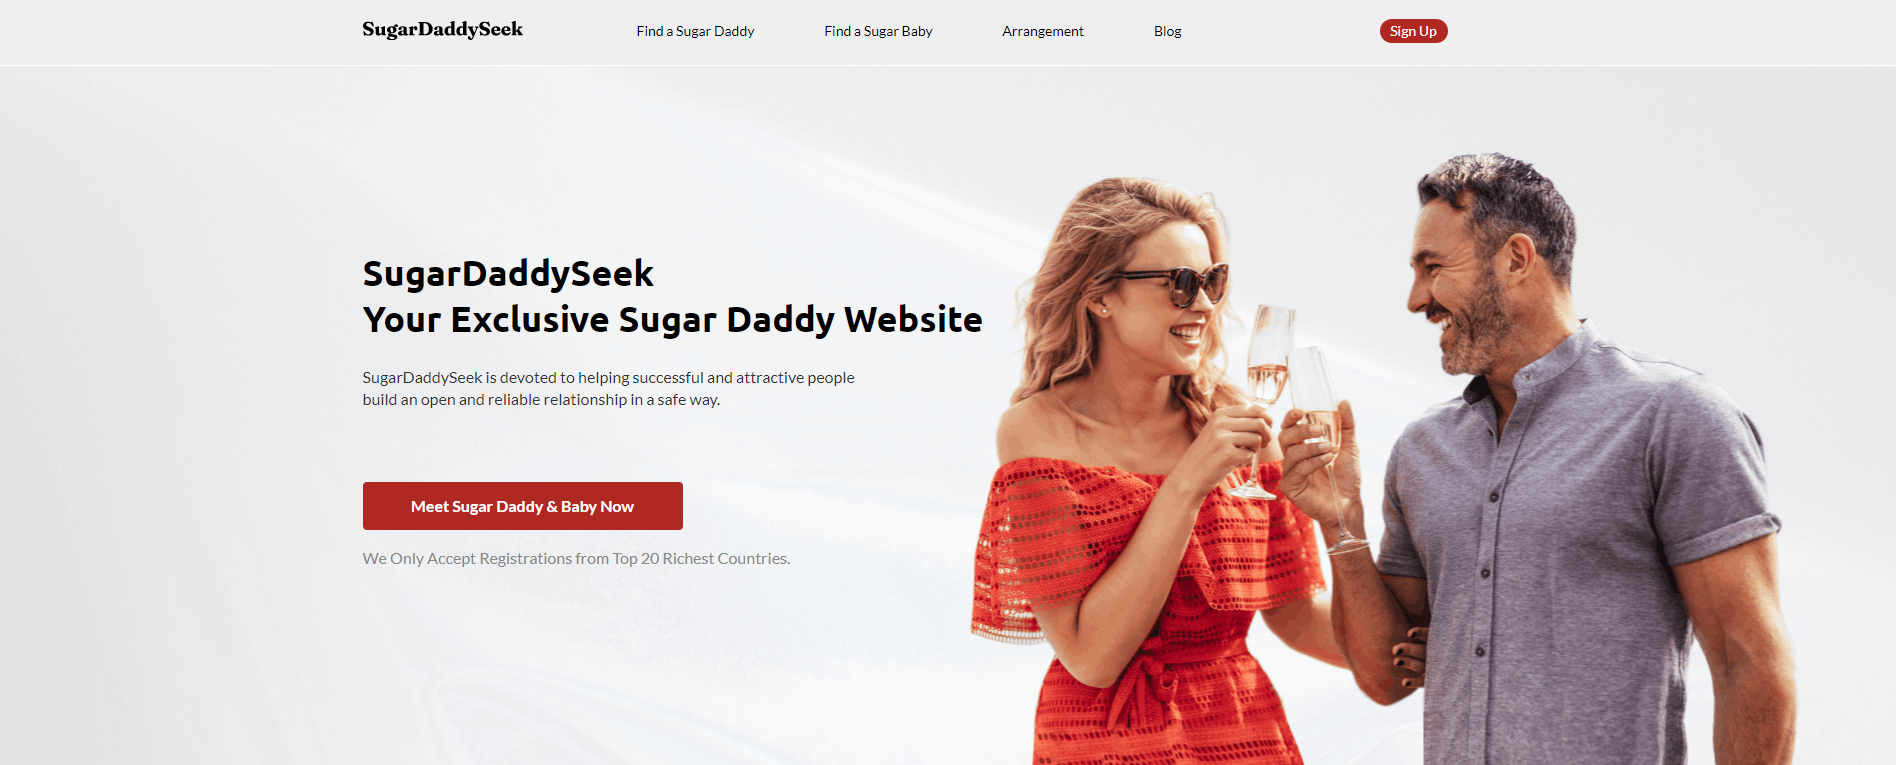 SugarDaddySeek - The Most Reliable Anonymous Sugar Baby Website